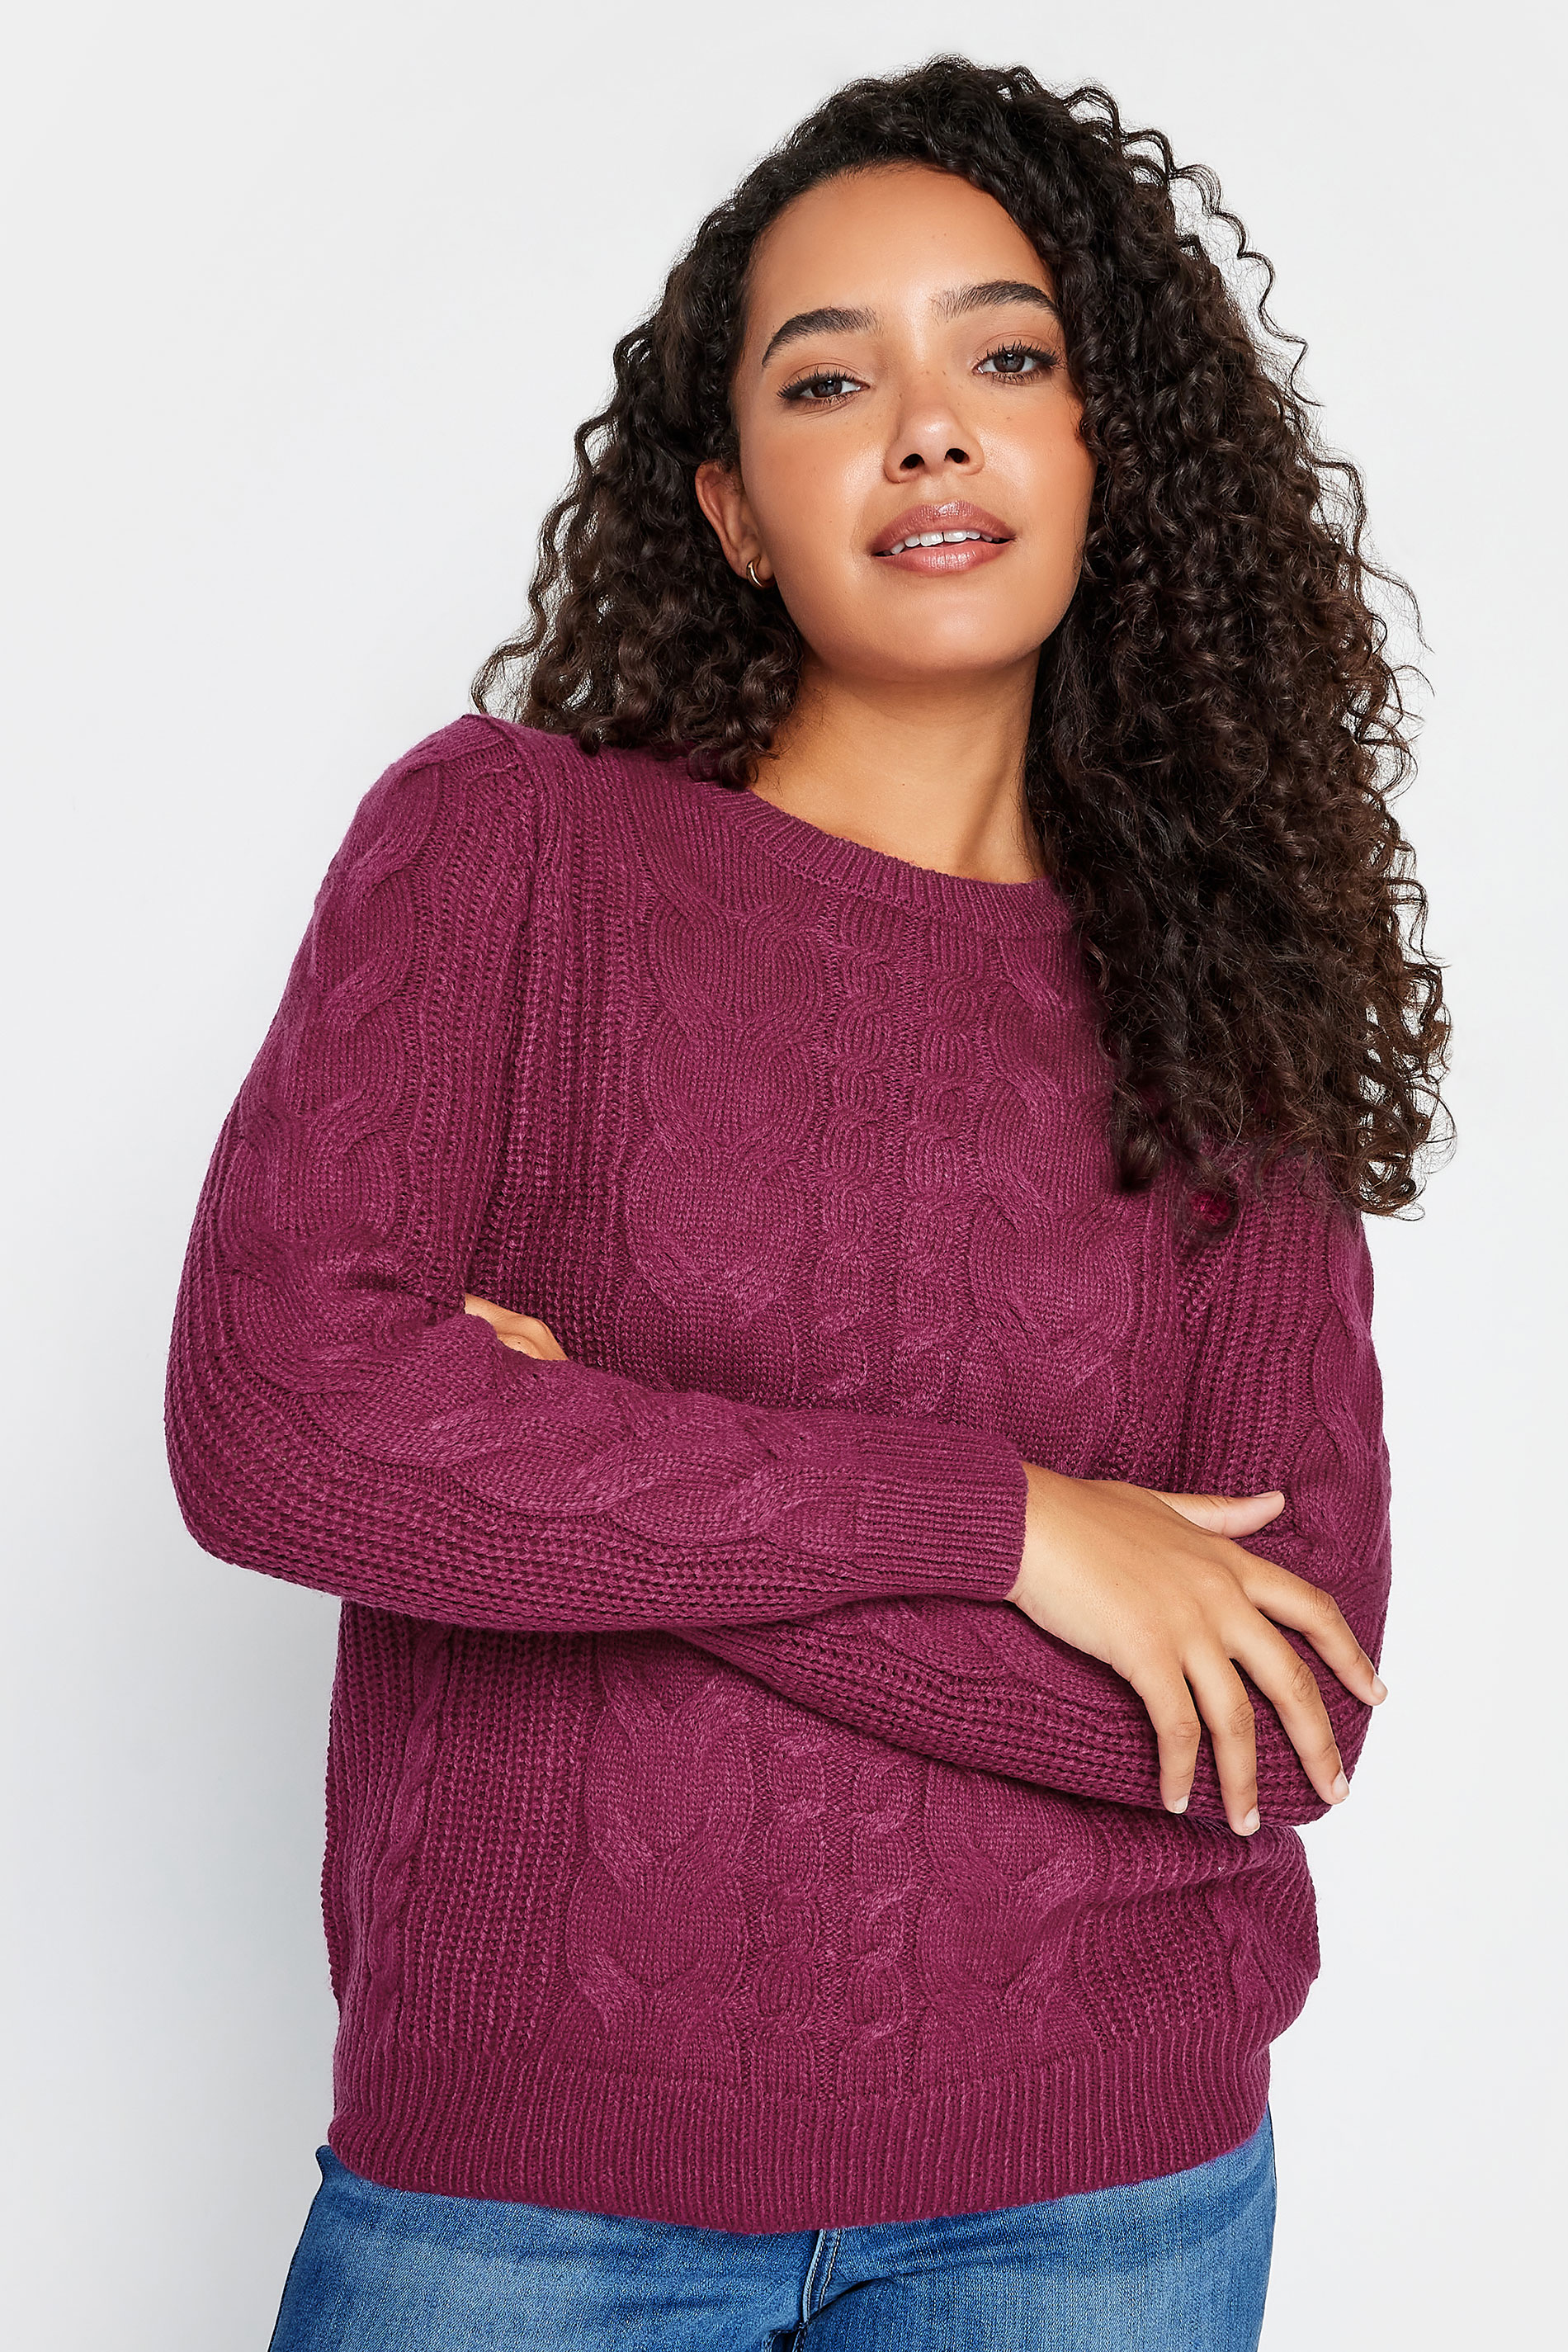 M&Co Dark Pink Cable Knit Jumper | M&Co 1